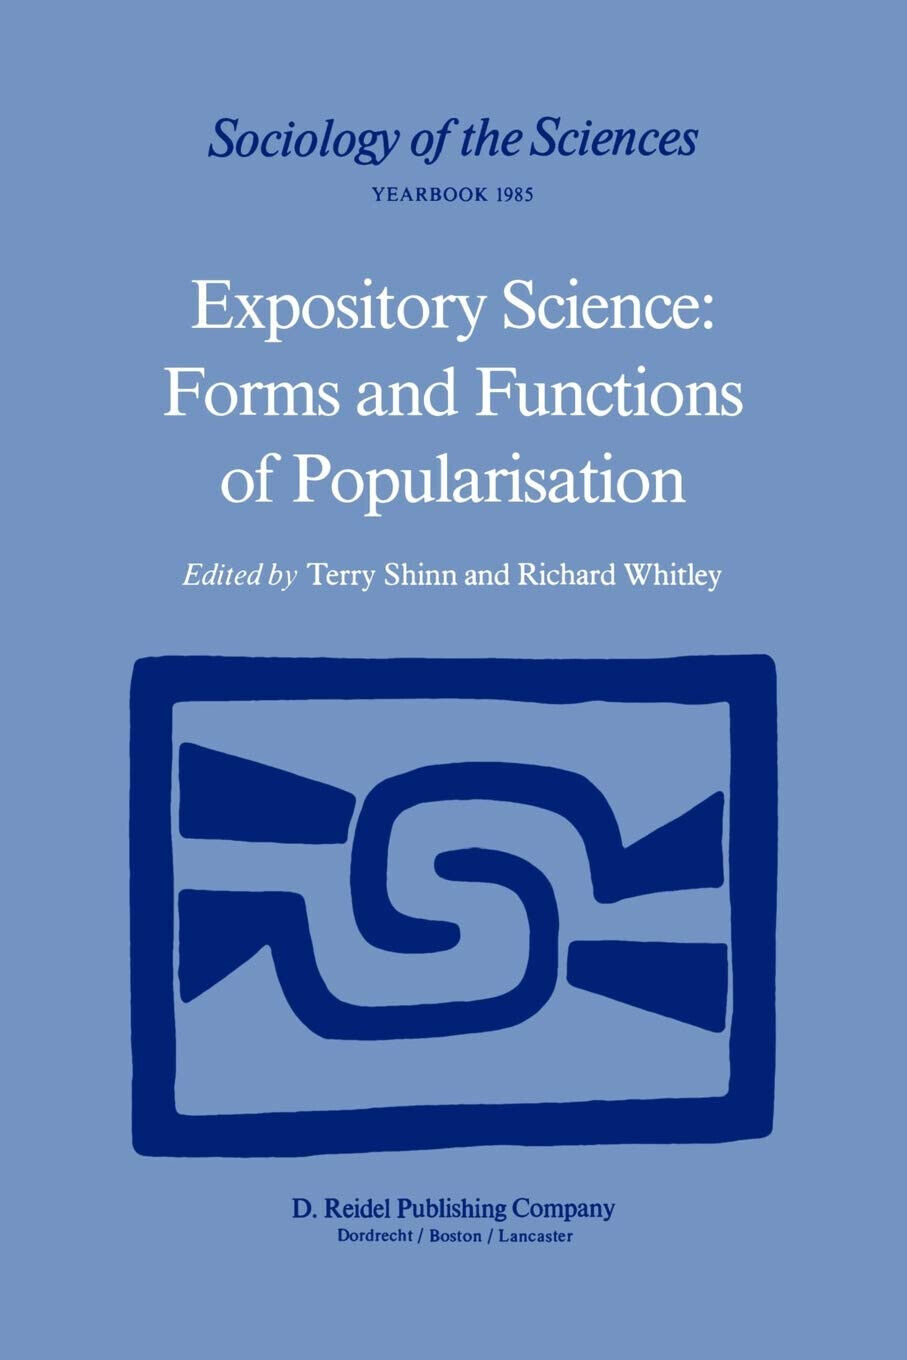 Expository Science: Forms and Functions of Popularisation - T. Shinn - 1985 libro usato